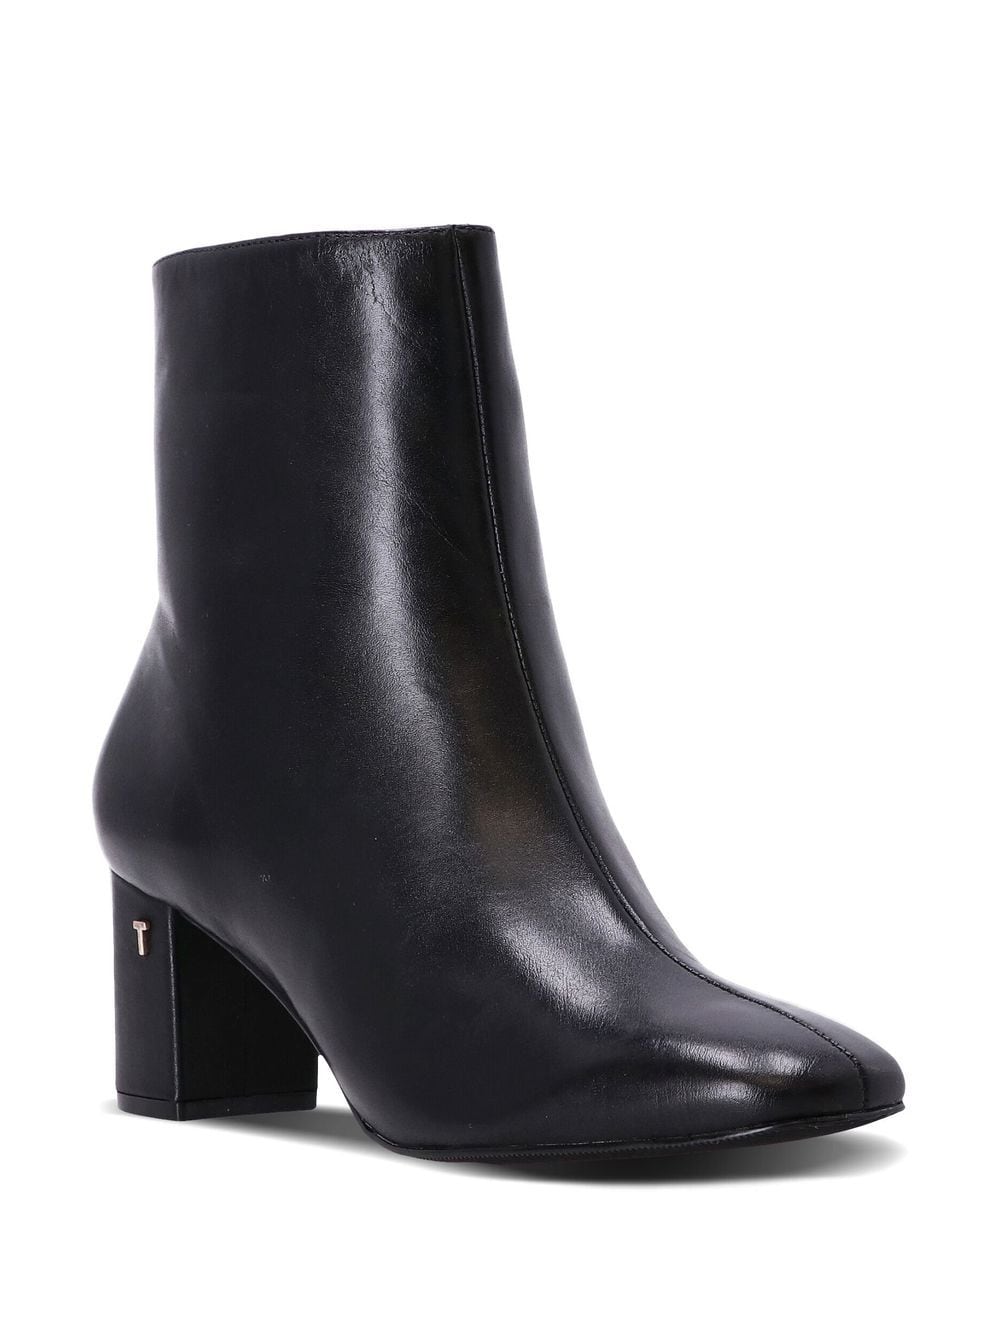 Ted Baker Neomie Leather 60mm Ankle Boots - Farfetch